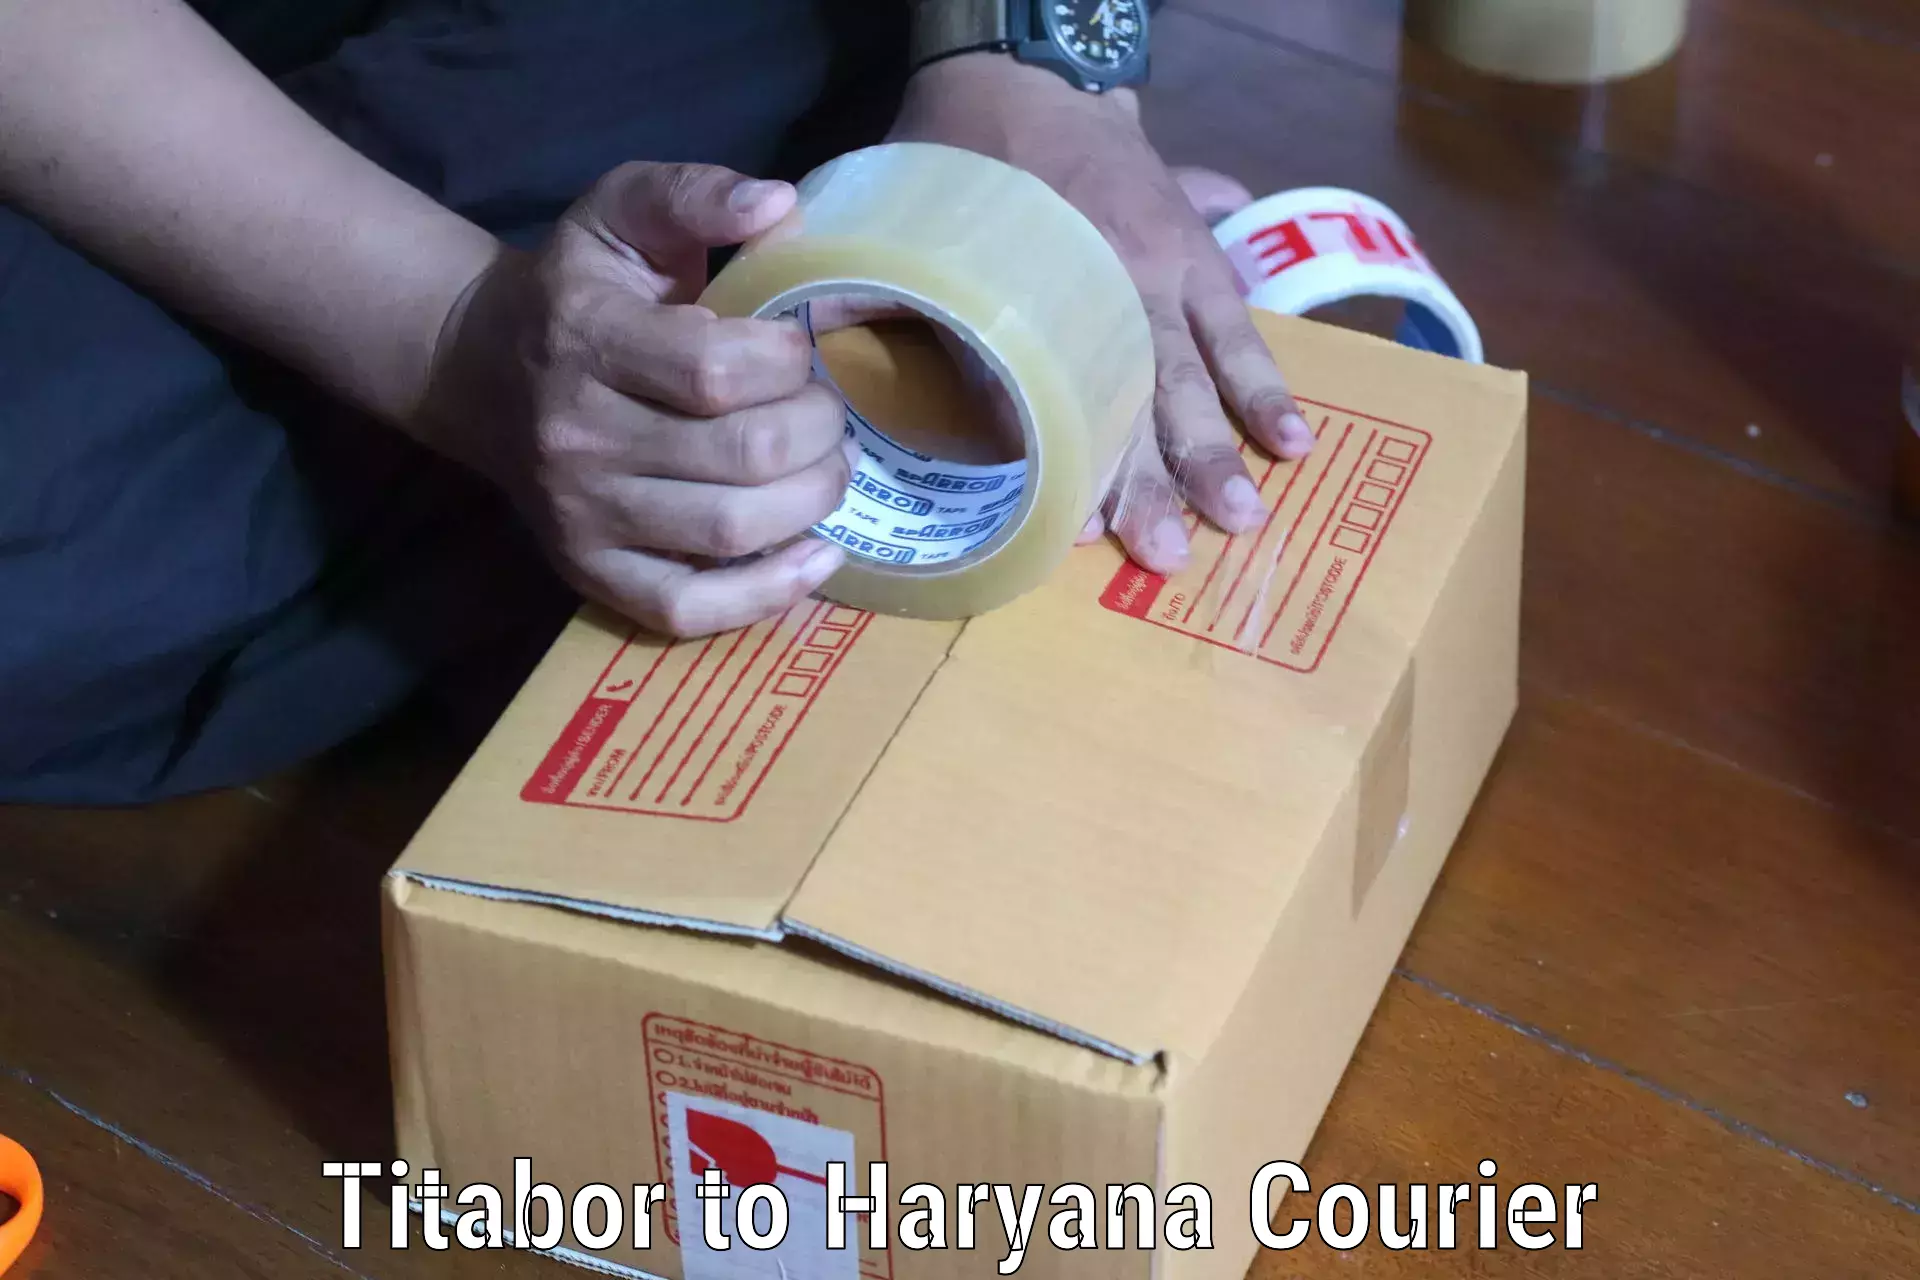 Comprehensive shipping network in Titabor to Haryana